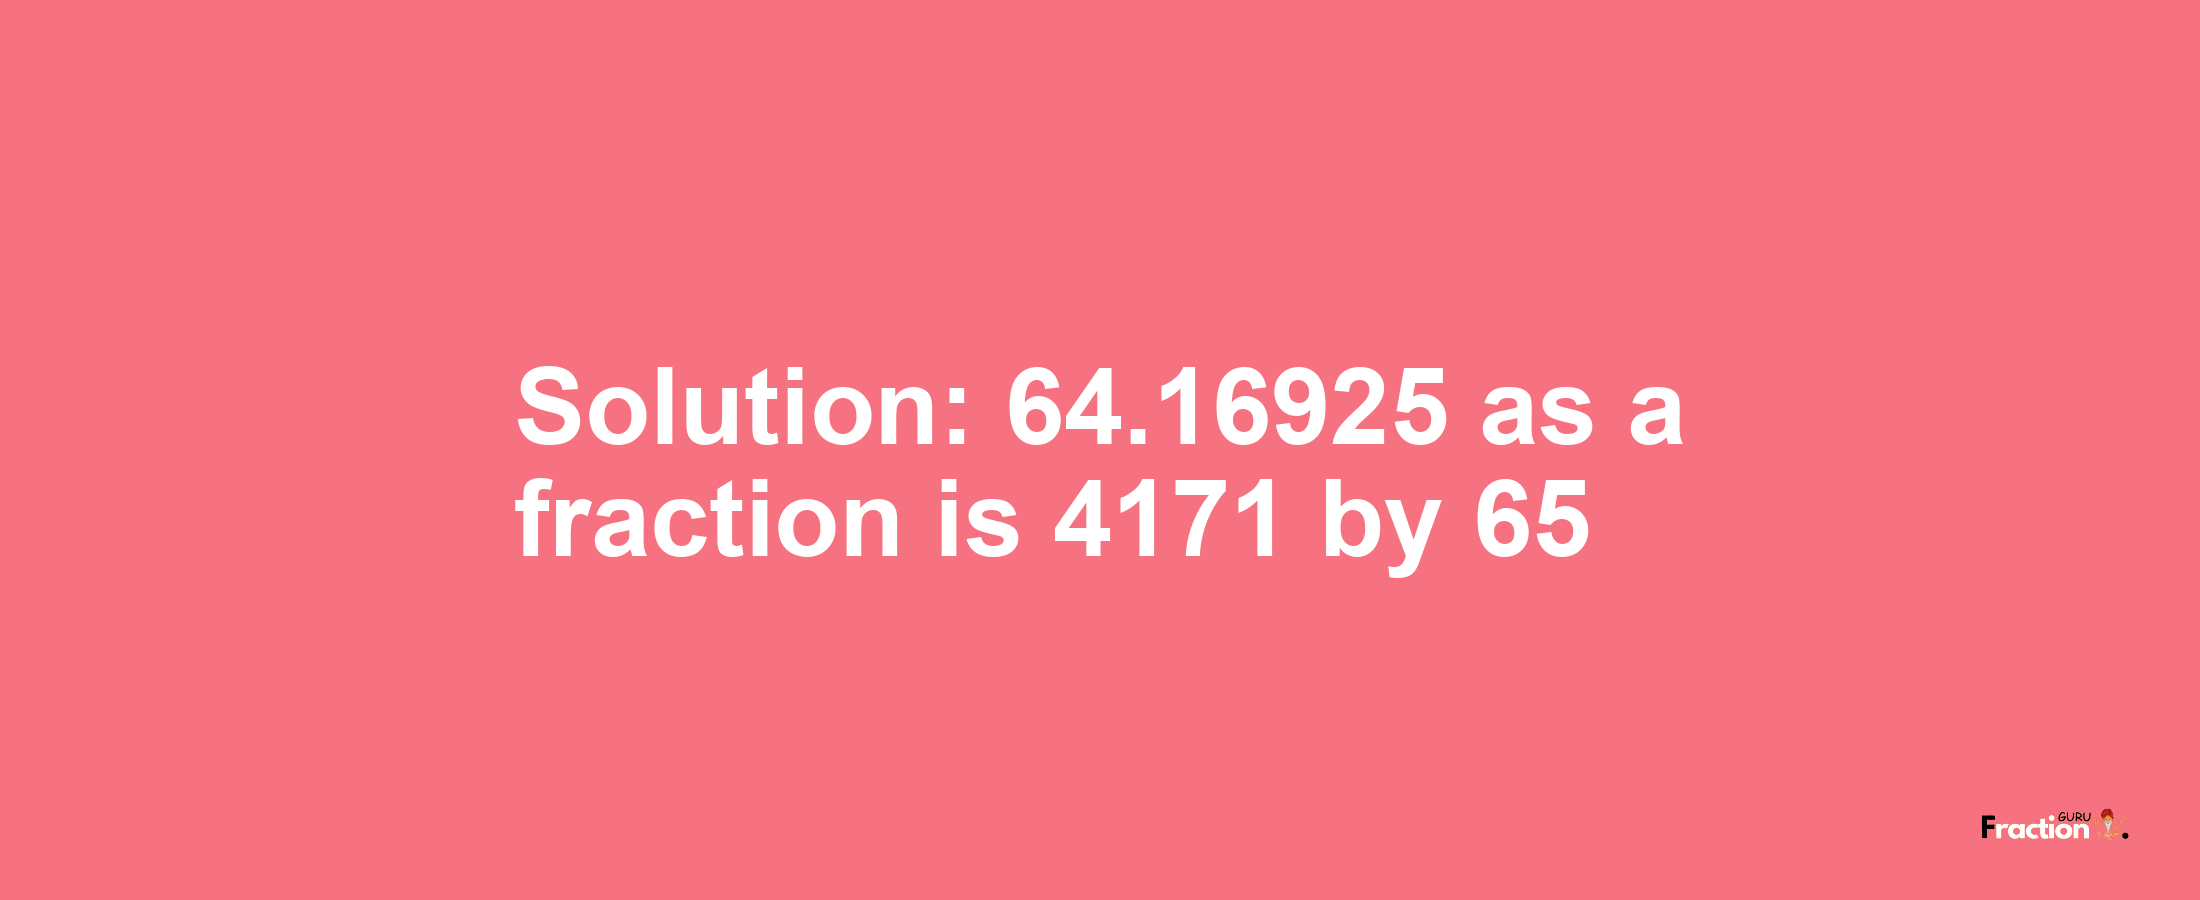 Solution:64.16925 as a fraction is 4171/65